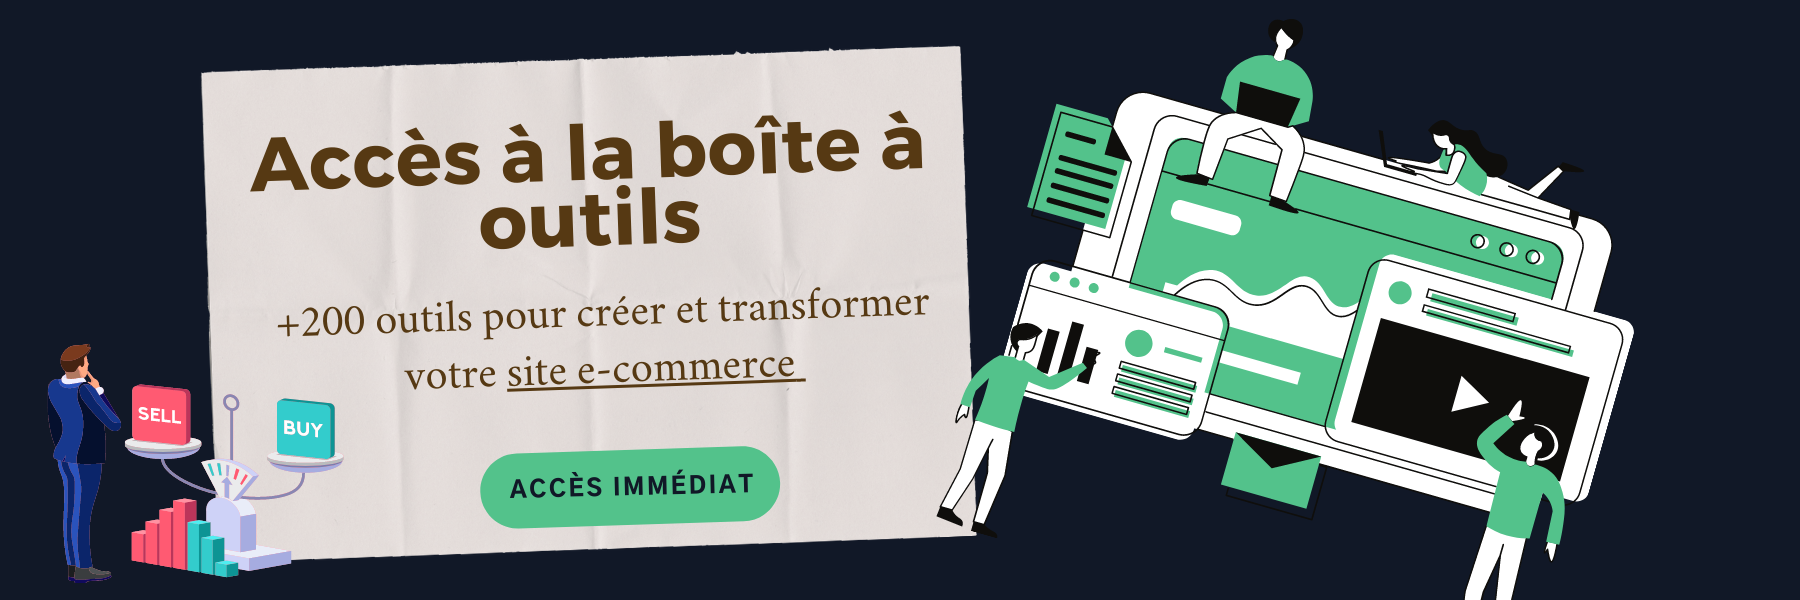 outils ecommerce